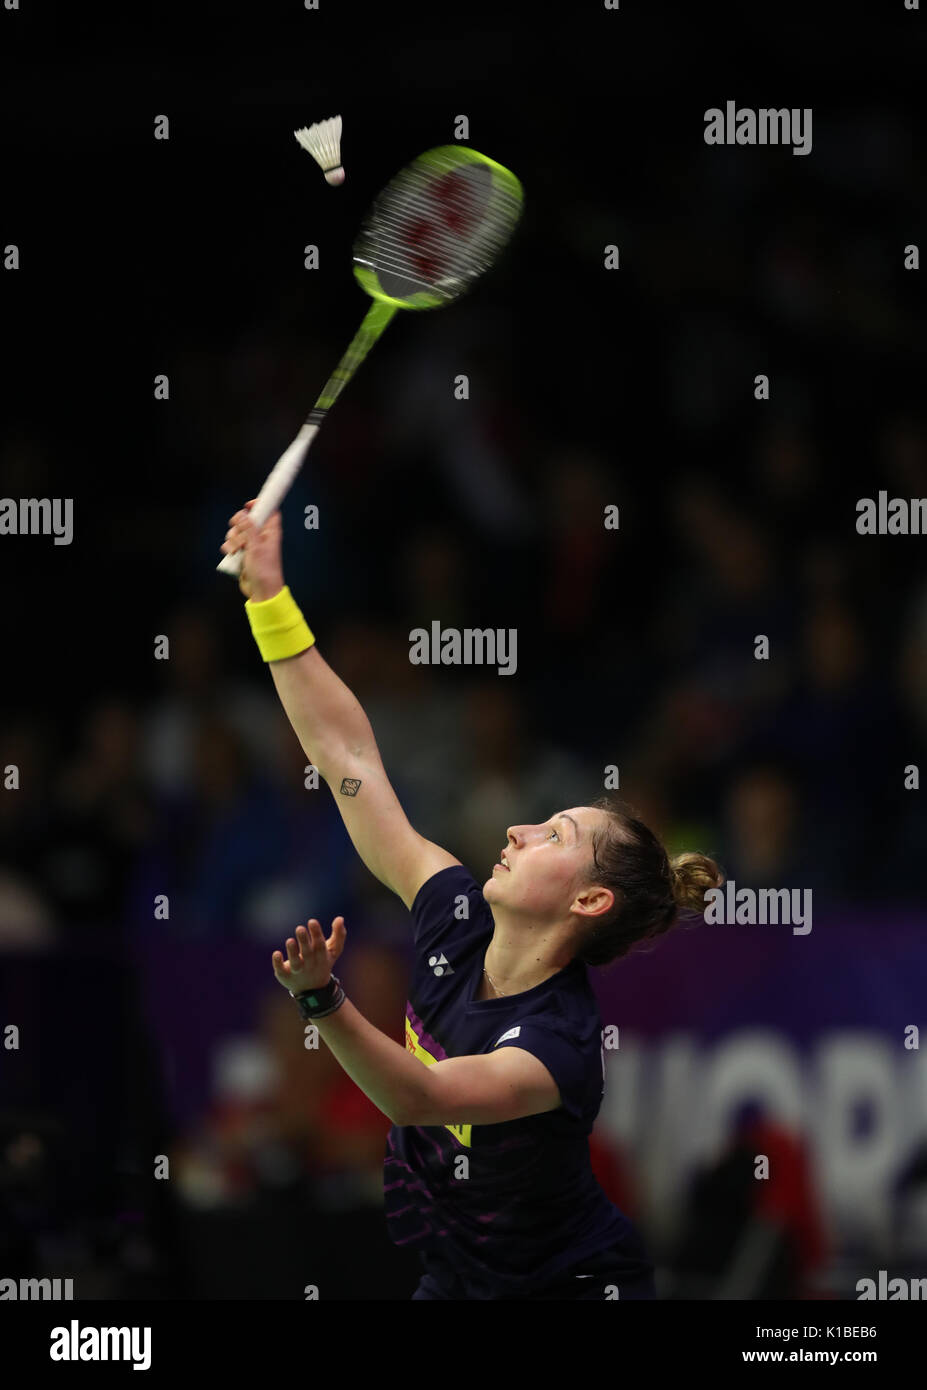 Scotland's Kirtsy Gilmour in the quarter finals during day five of the 2017 BWF World Championships at the Emirates Arena, Glasgow. PRESS ASSOCIATION Photo. Picture date: Friday August 25, 2017. See PA story BADMINTON World. Photo credit should read: Jane Barlow/PA Wire. RESTRICTIONS: Editorial use only. No commercial use. Stock Photo